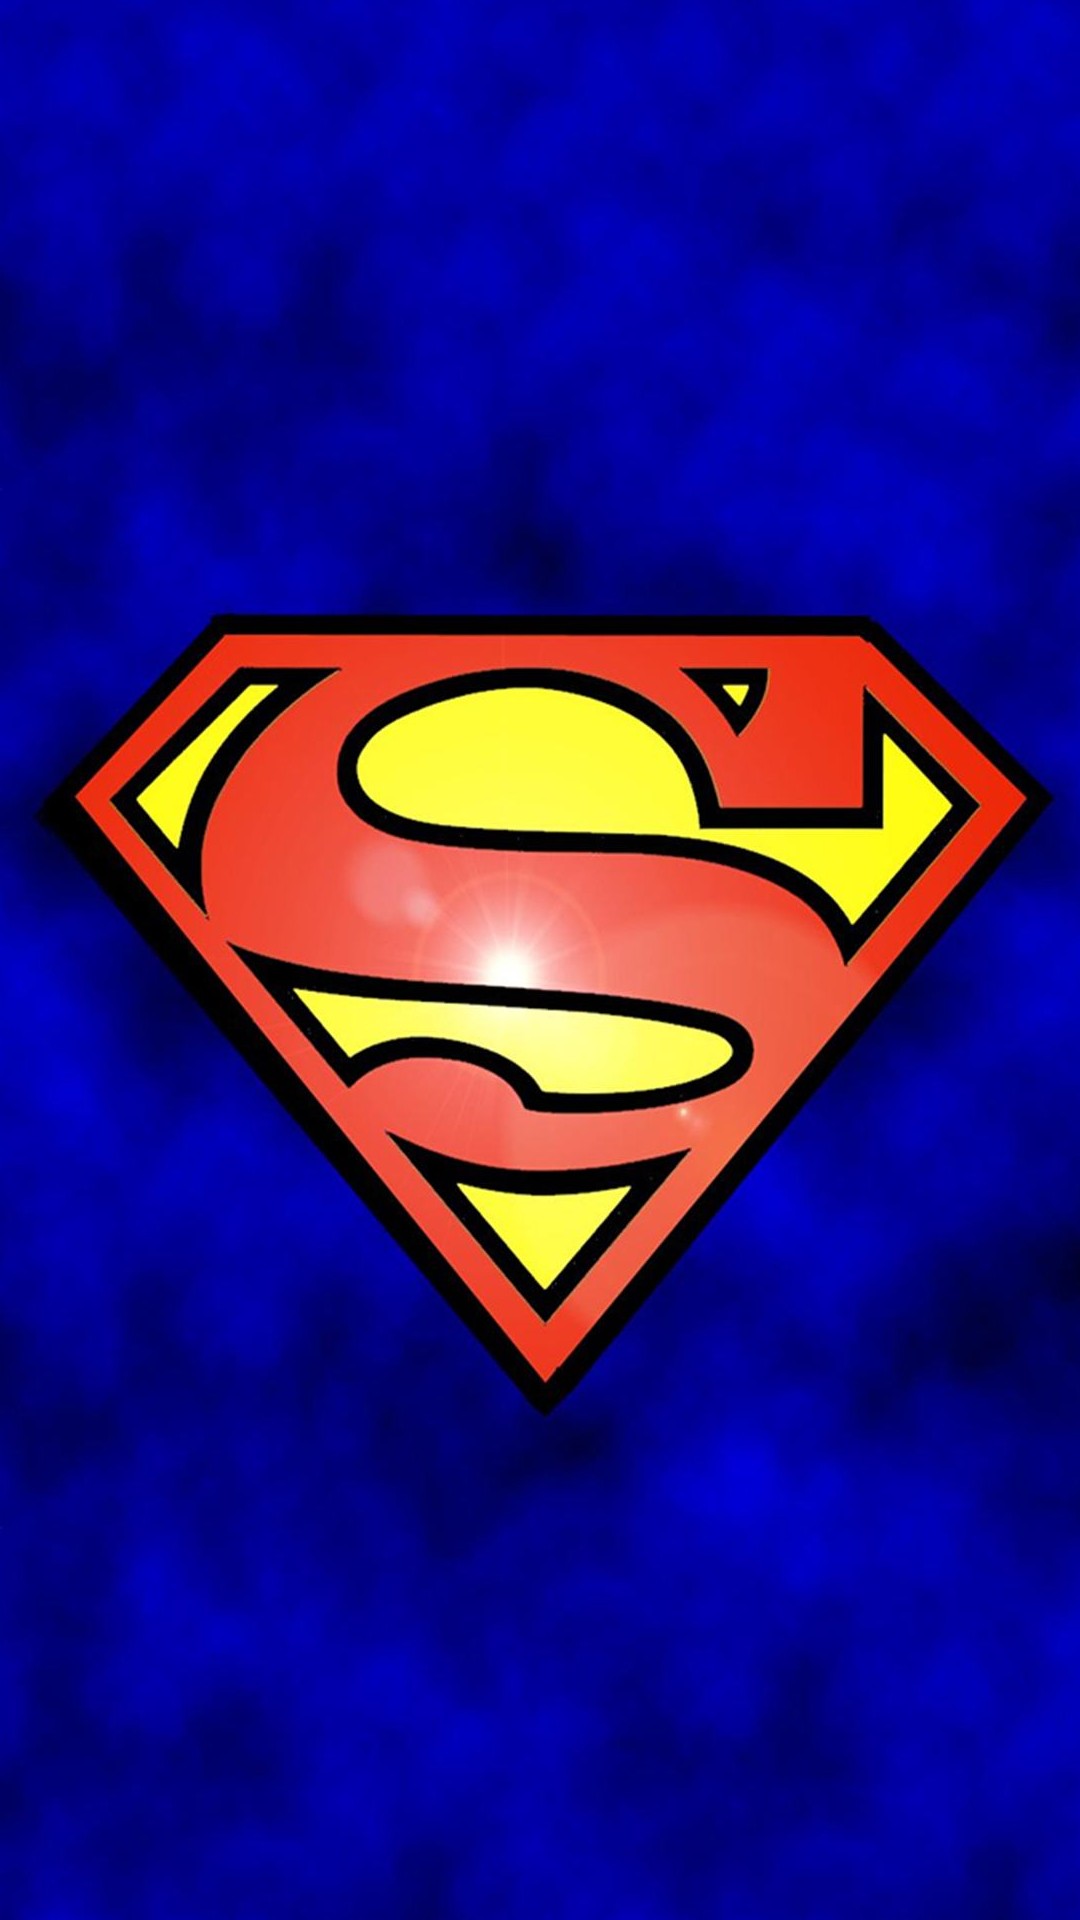 Superman Logo iPhone6 Plus Wallpaper for iPhone 4S and iPhone 5S